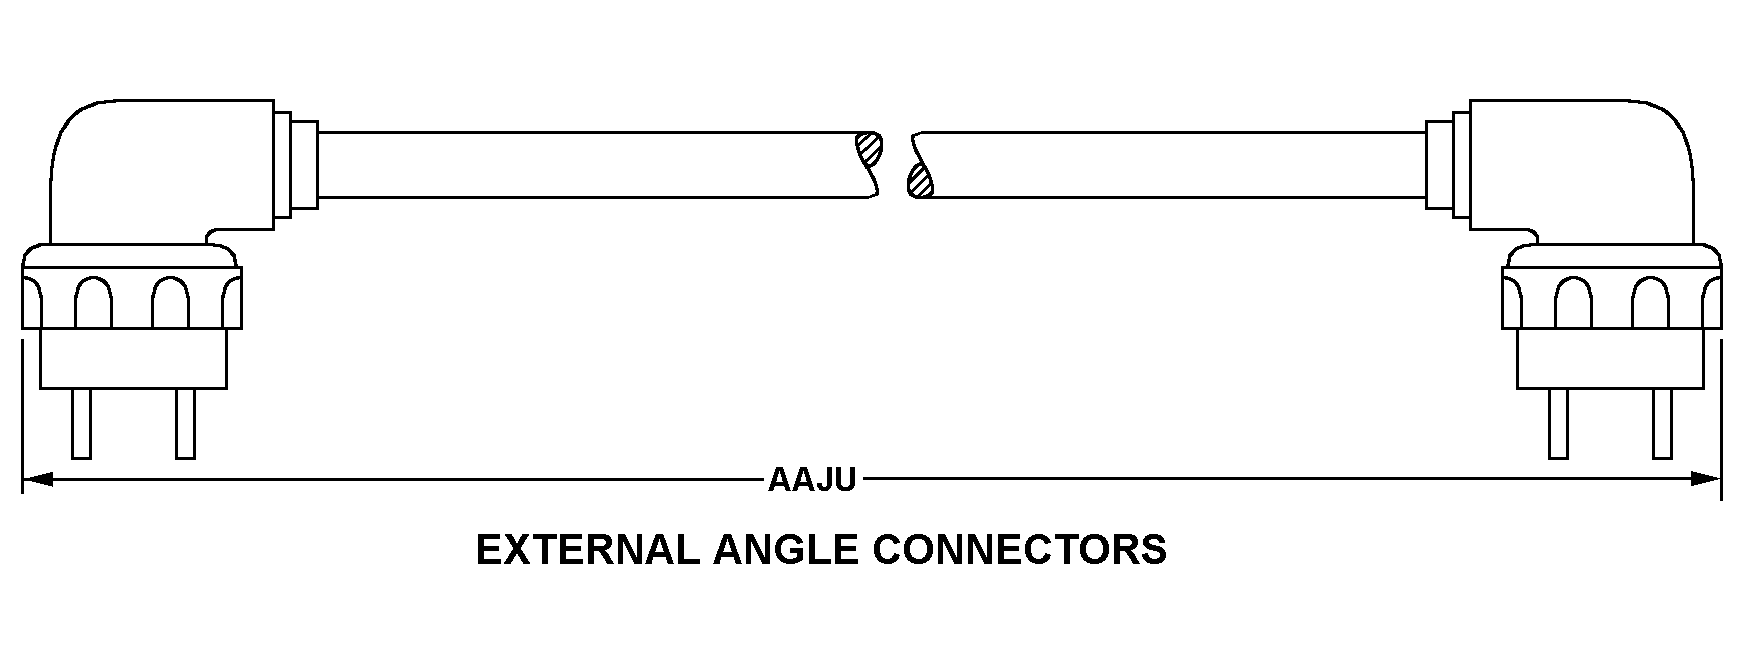 EXTERNAL ANGLE CONNECTORS style nsn 5995-01-488-6434